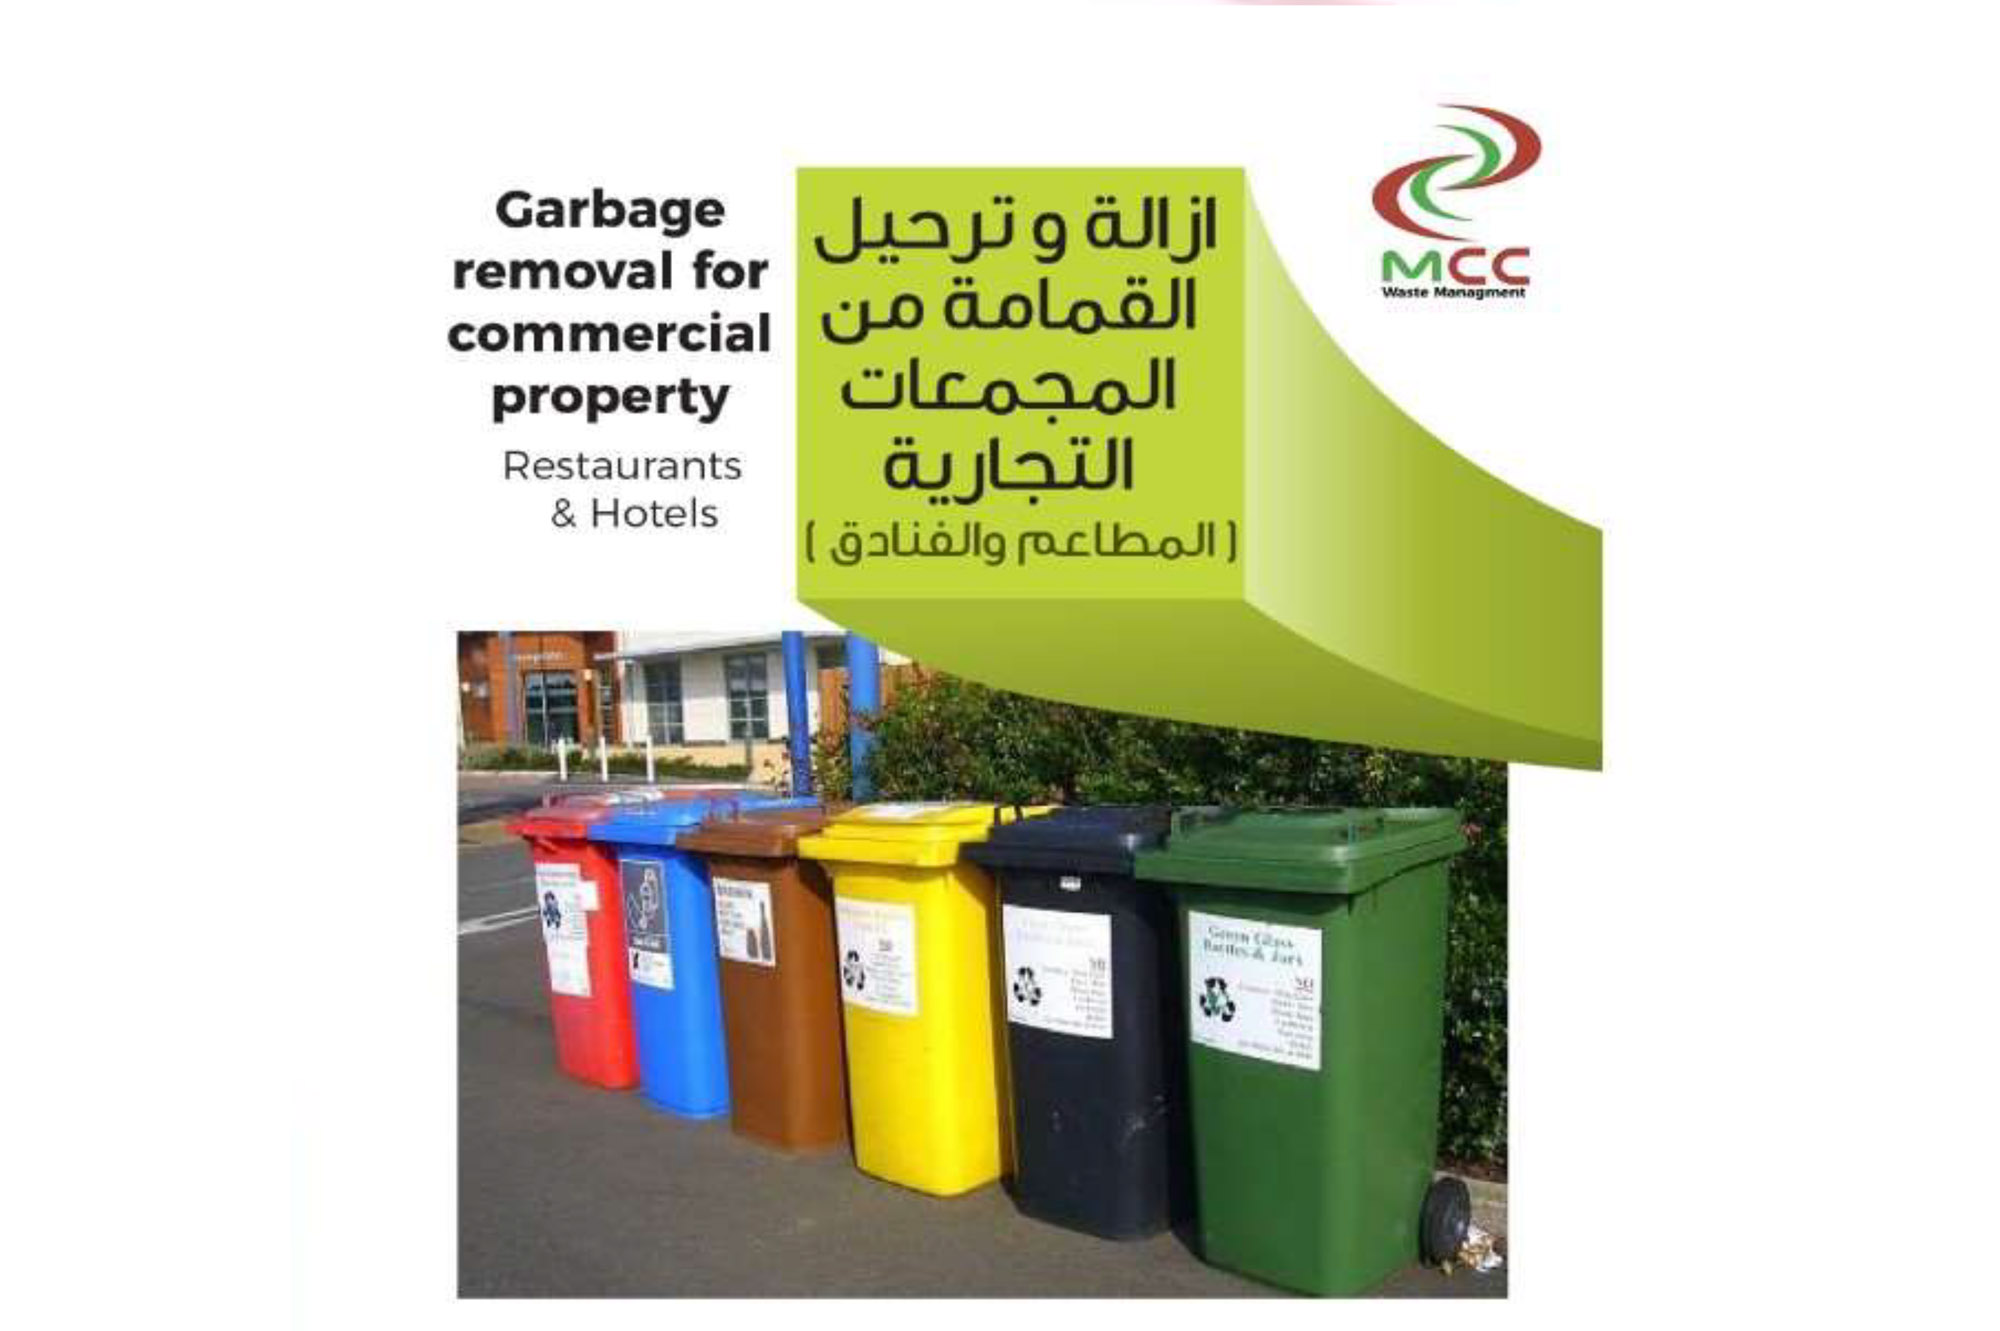 Garbage Removal for Commercial Property in Qatar | Qatar modern cleaning and waste management company MCC Qatar is the leading Waste Management companies in Qatar recycling | qatar waste management companies | manage of waste in Qatar